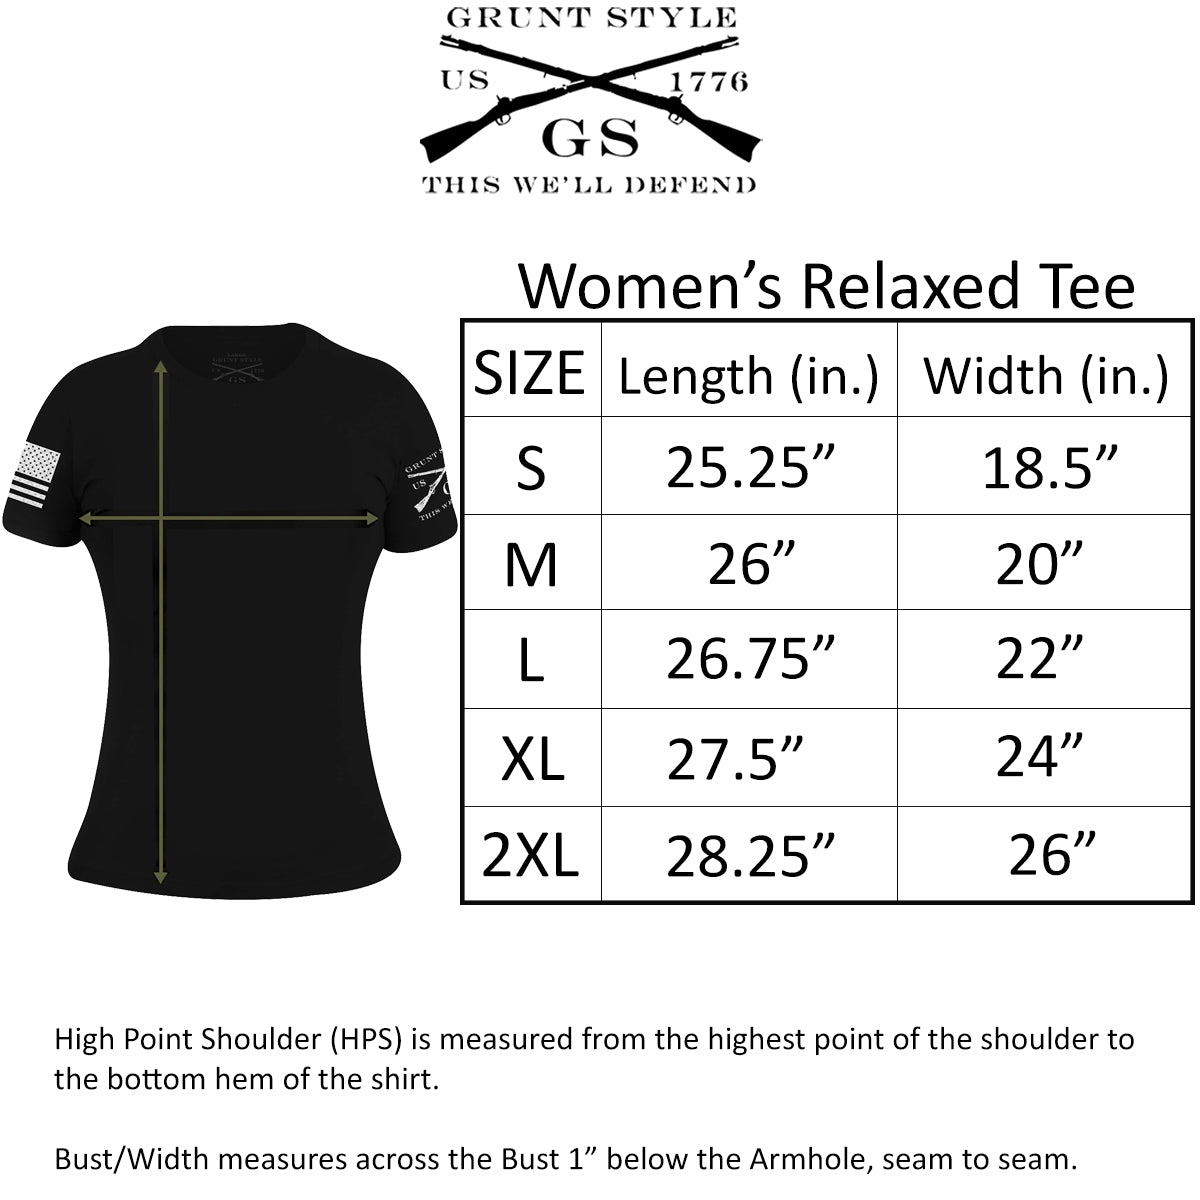 Grunt Style Women's Relaxed Fit USN - Homeward Bound T-Shirt - Black Grunt Style